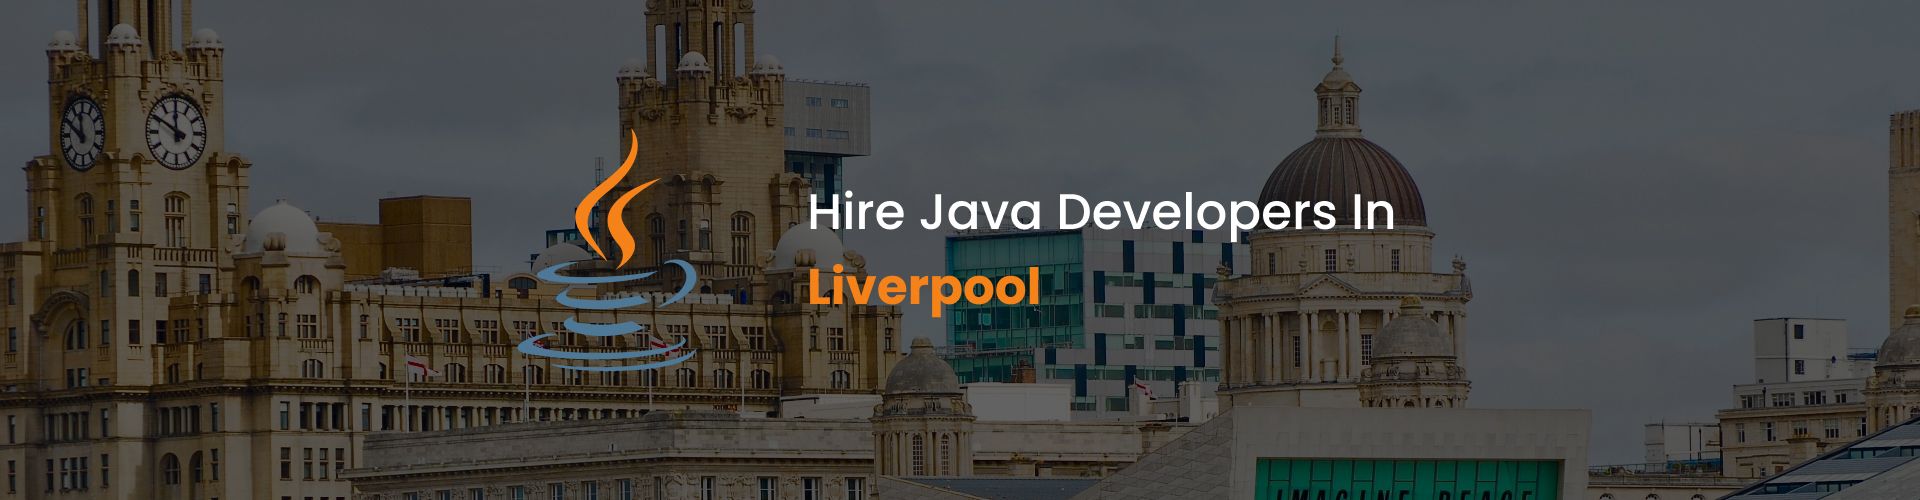 hire java developers in liverpool